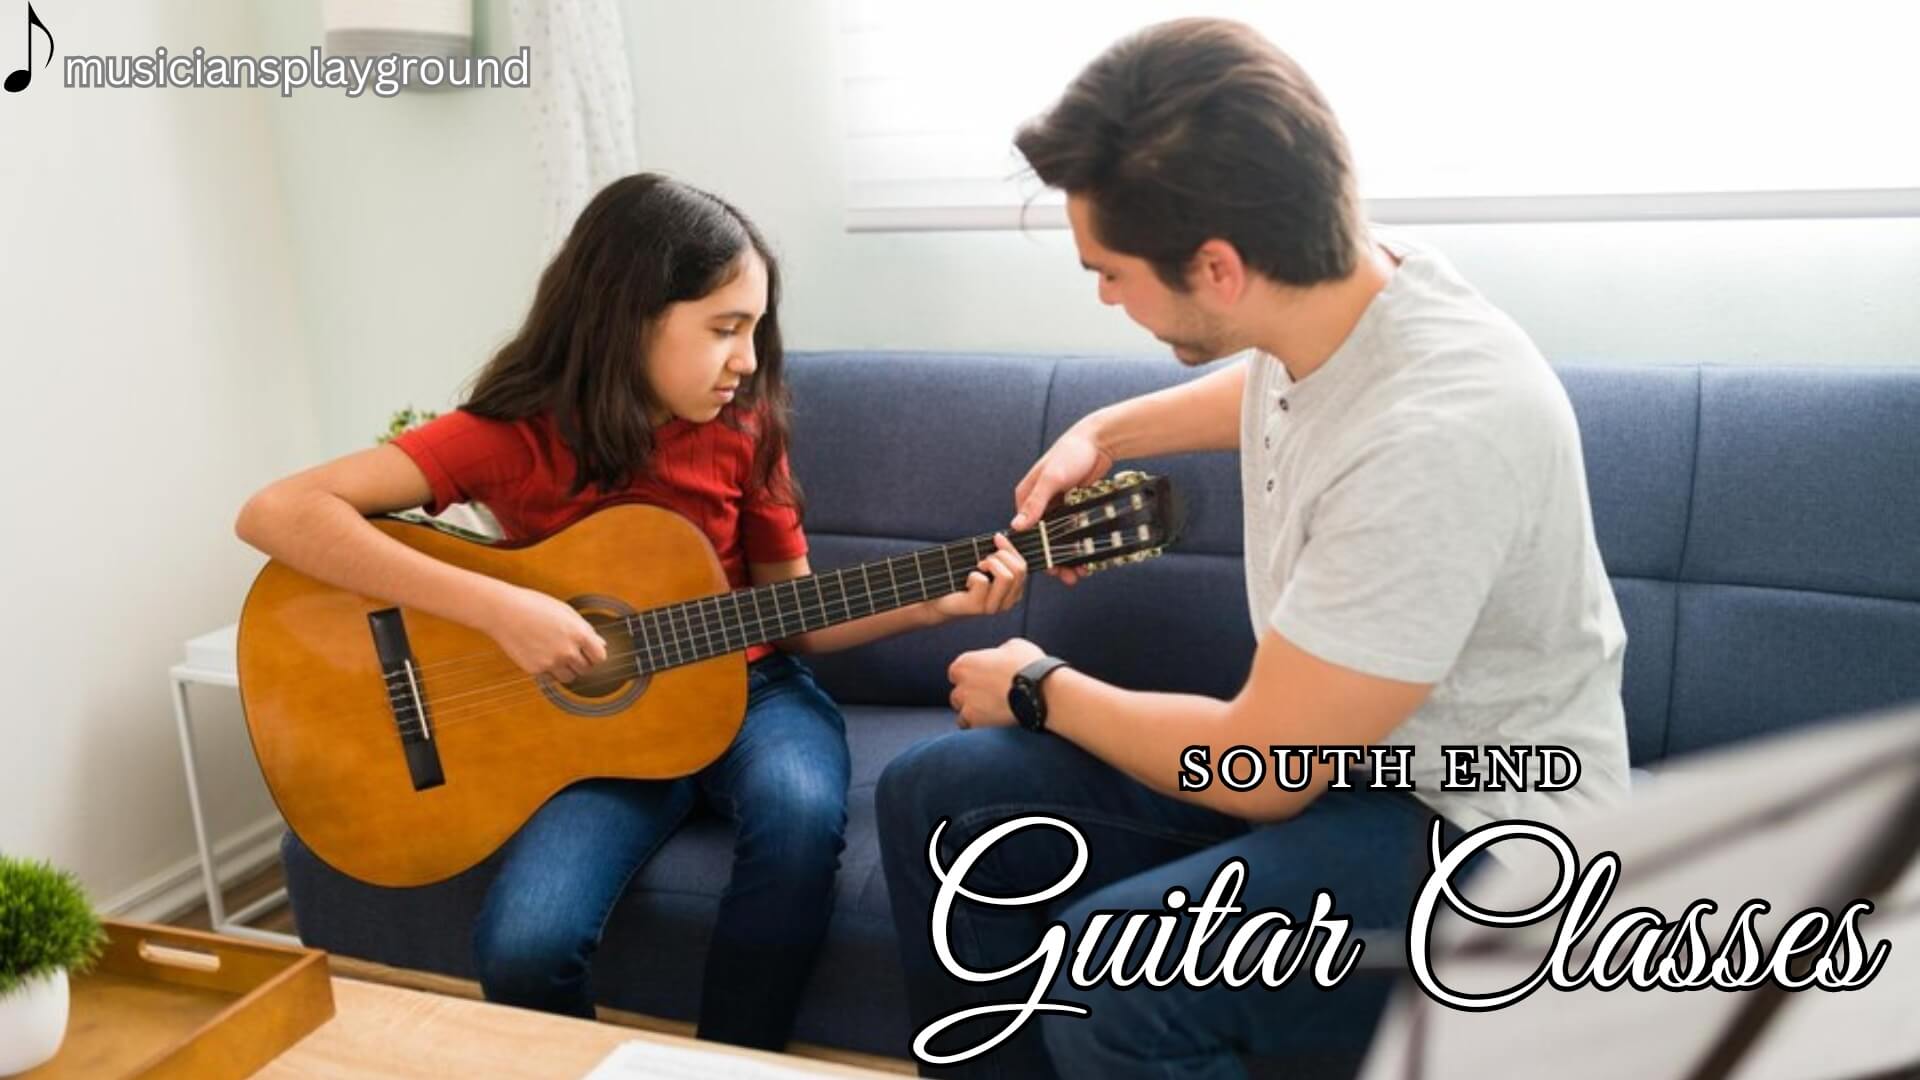 Welcome to South End: Your Destination for Guitar Classes